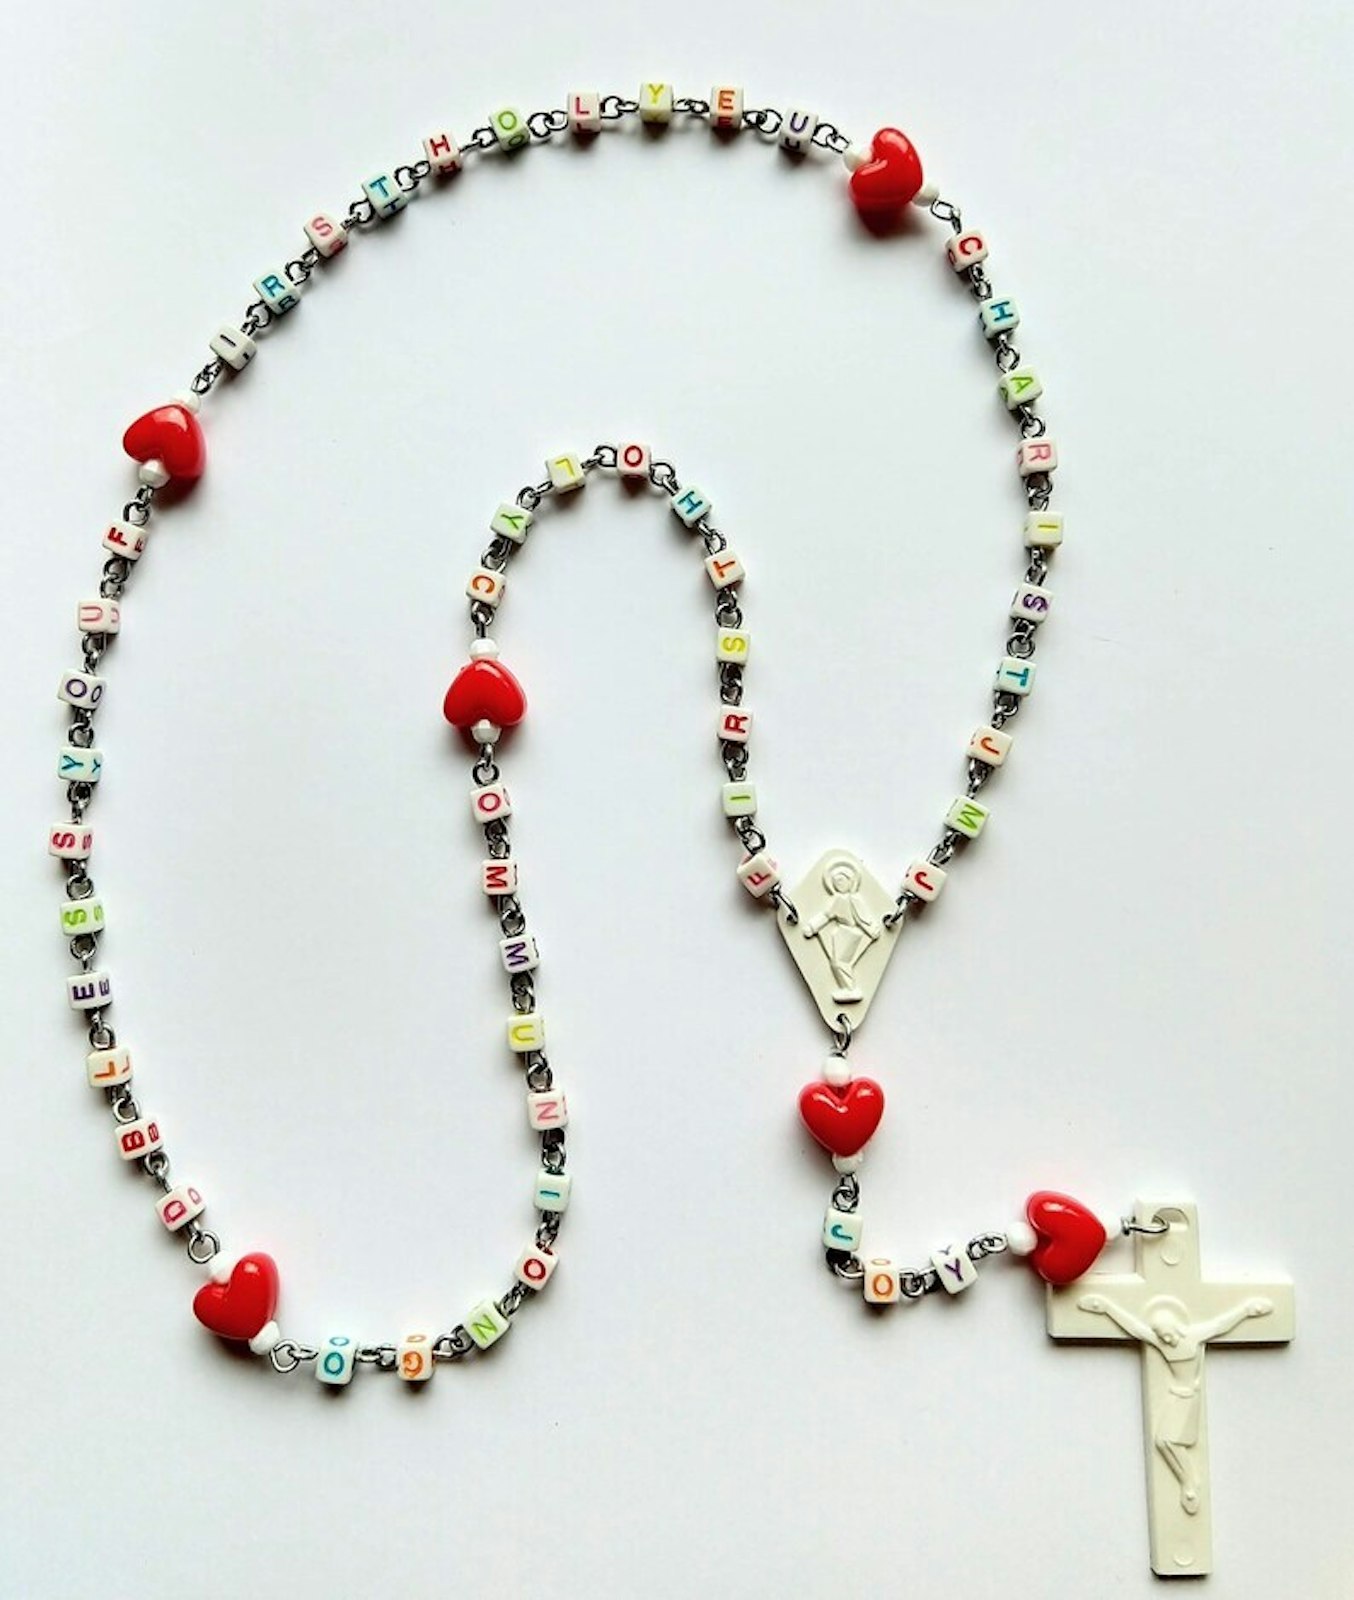 One of the custom rosaries available on Weber's Etsy shop includes customizable letter beads that can be arranged to the client's designs.